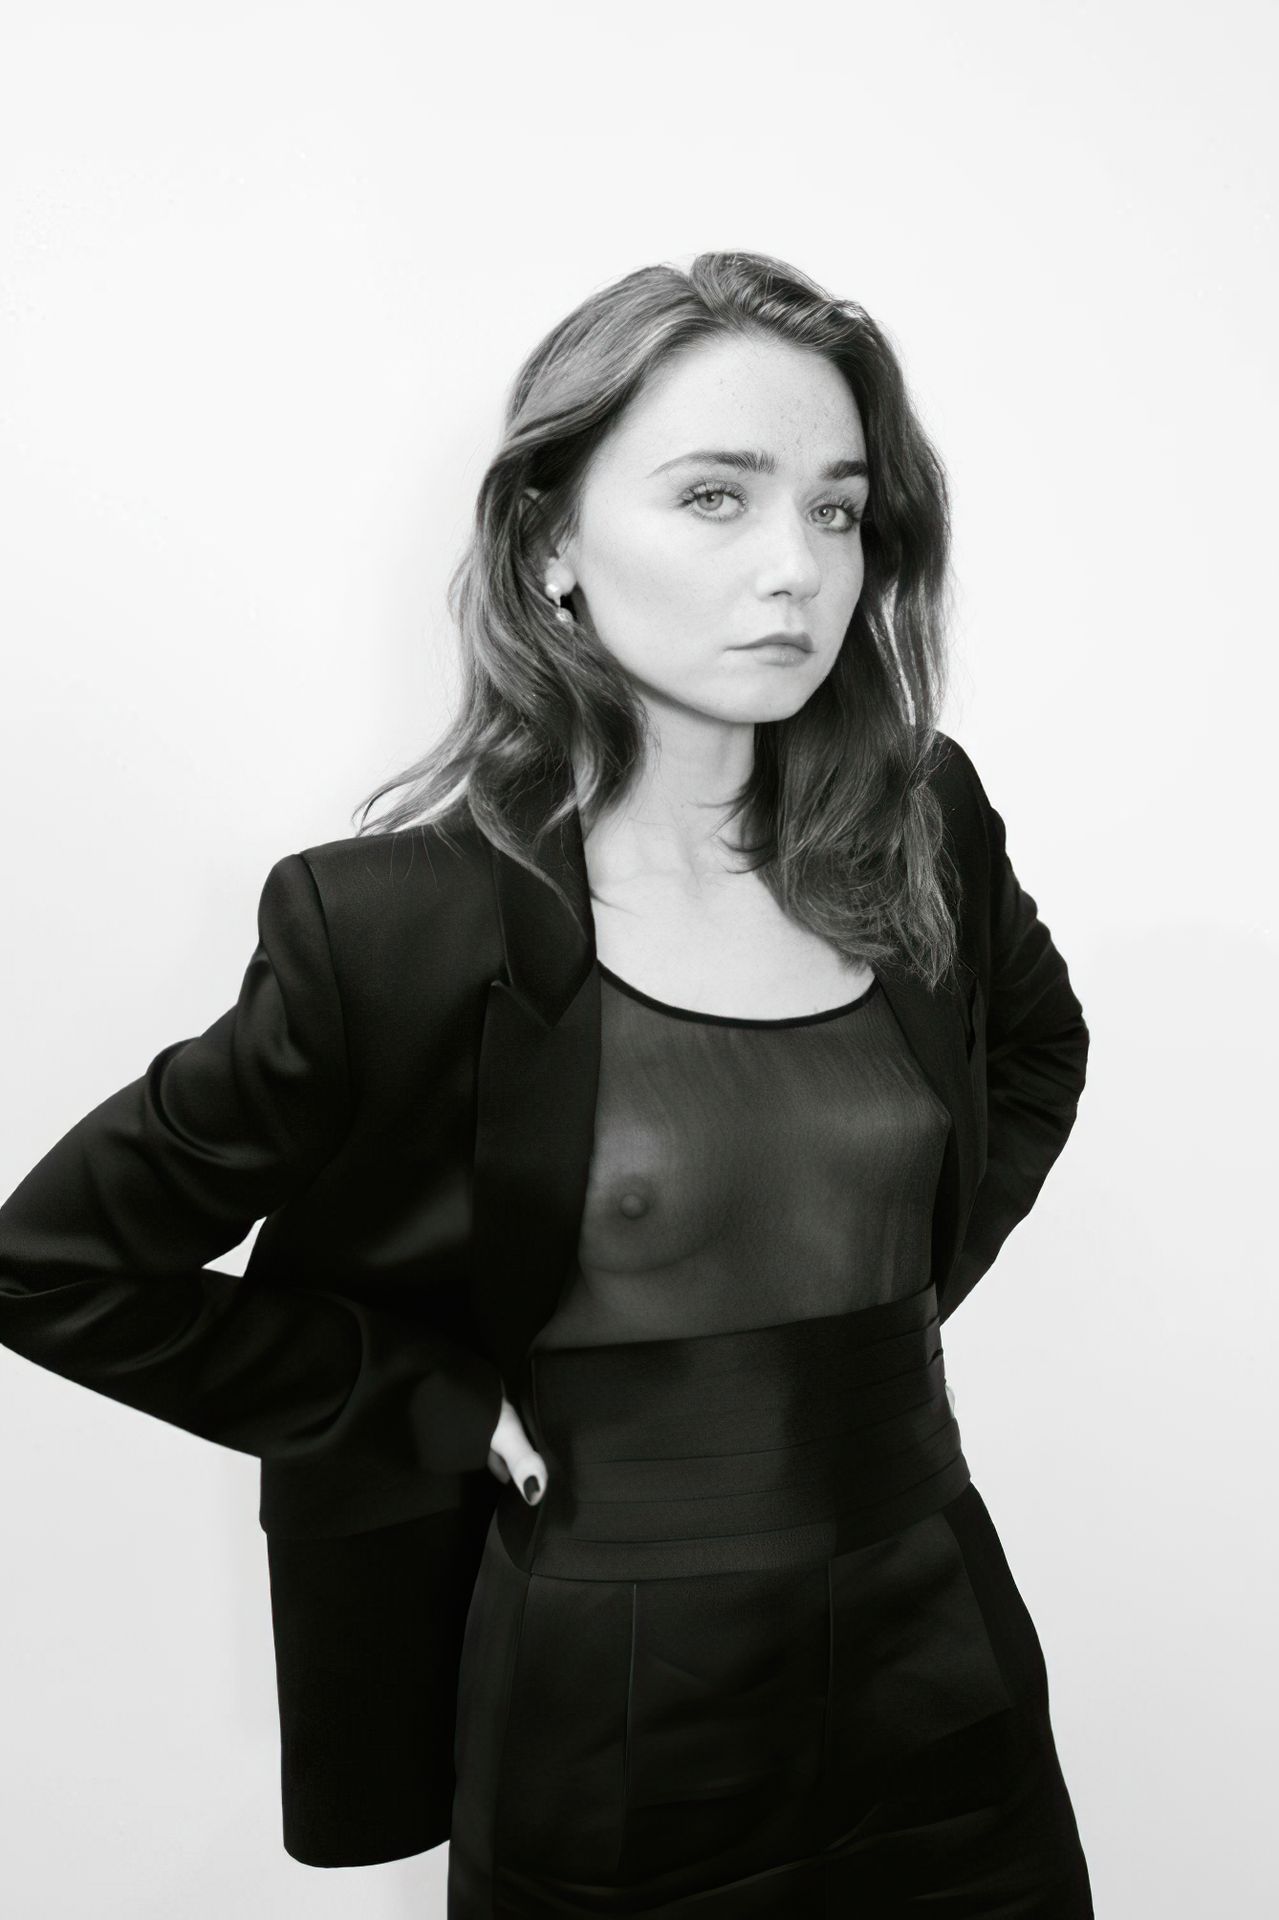 Jessica Barden See Through (1 New Photo)